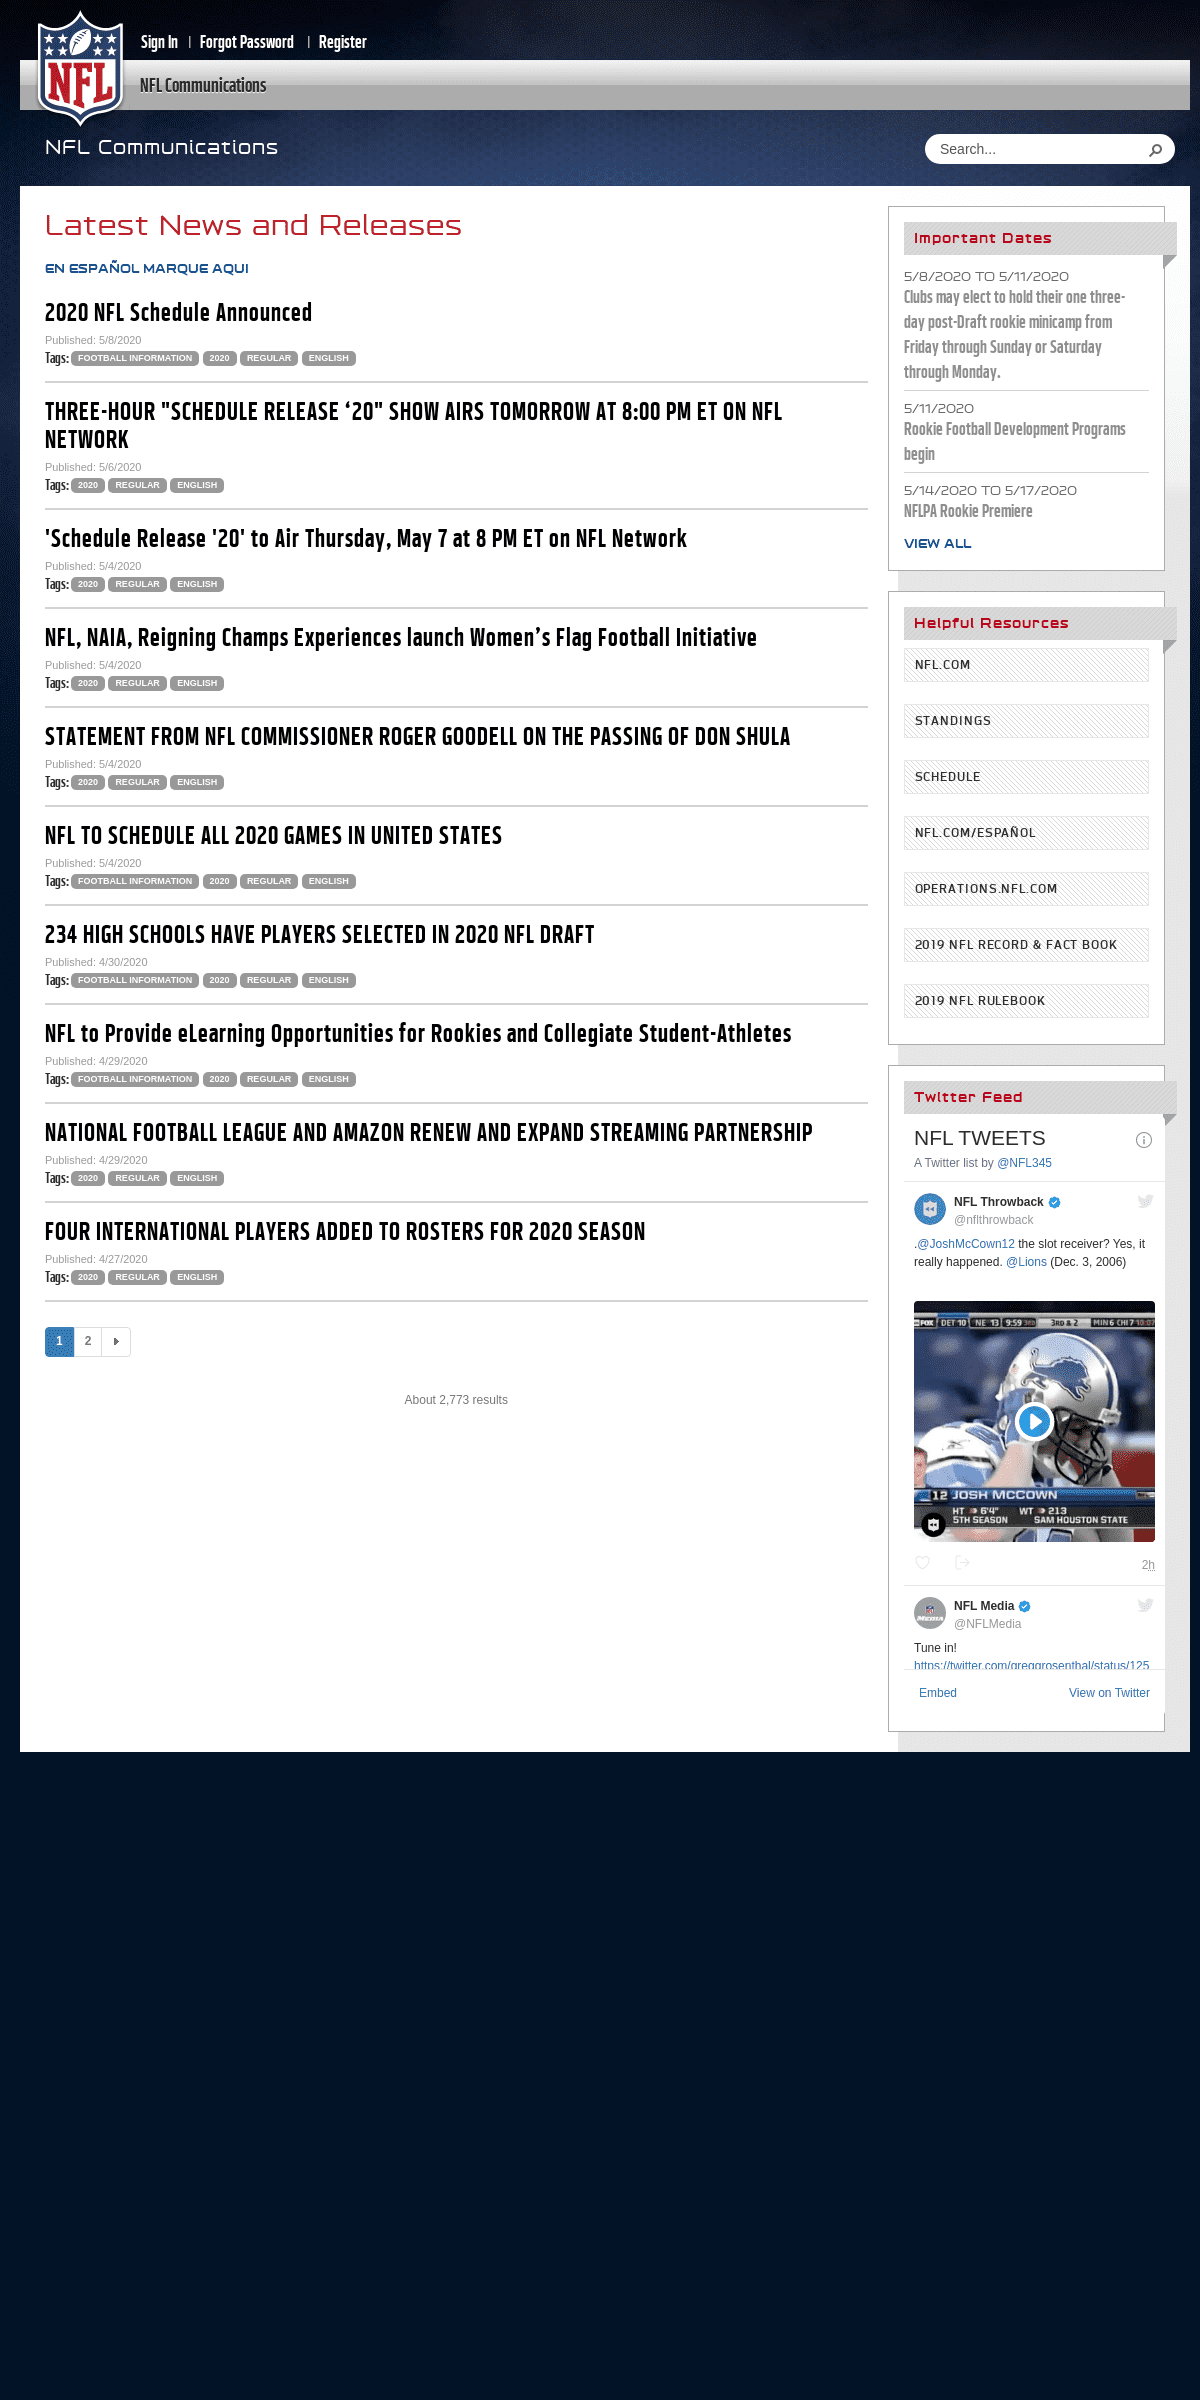 A complete backup of nflcommunications.com